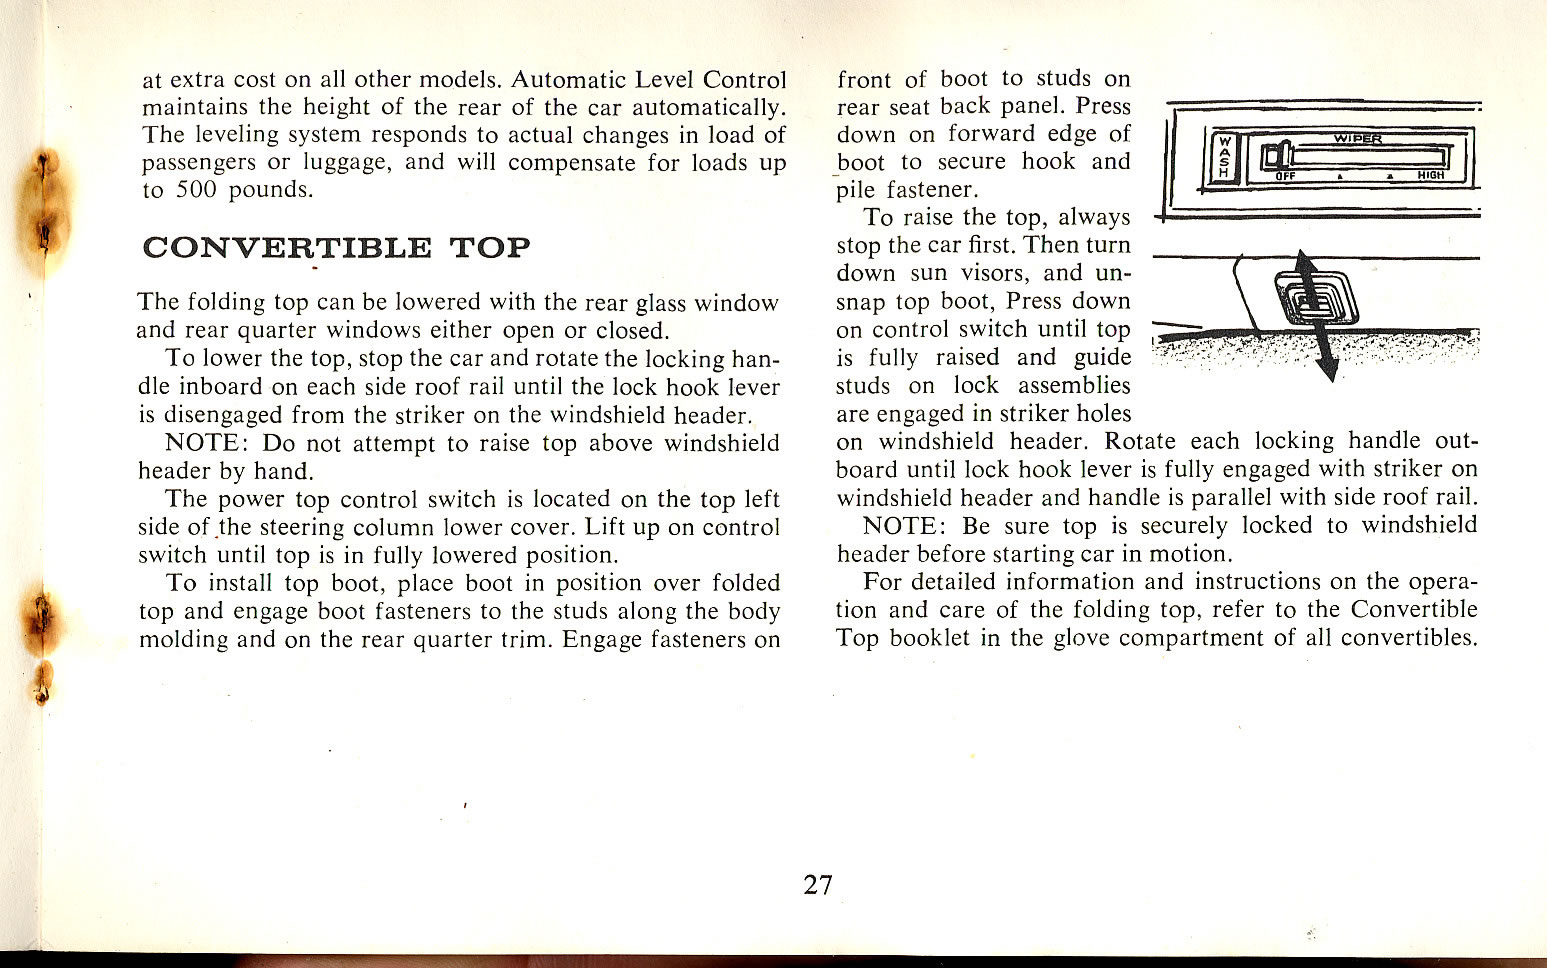 1965 Cadillac Owners Manual Page 17